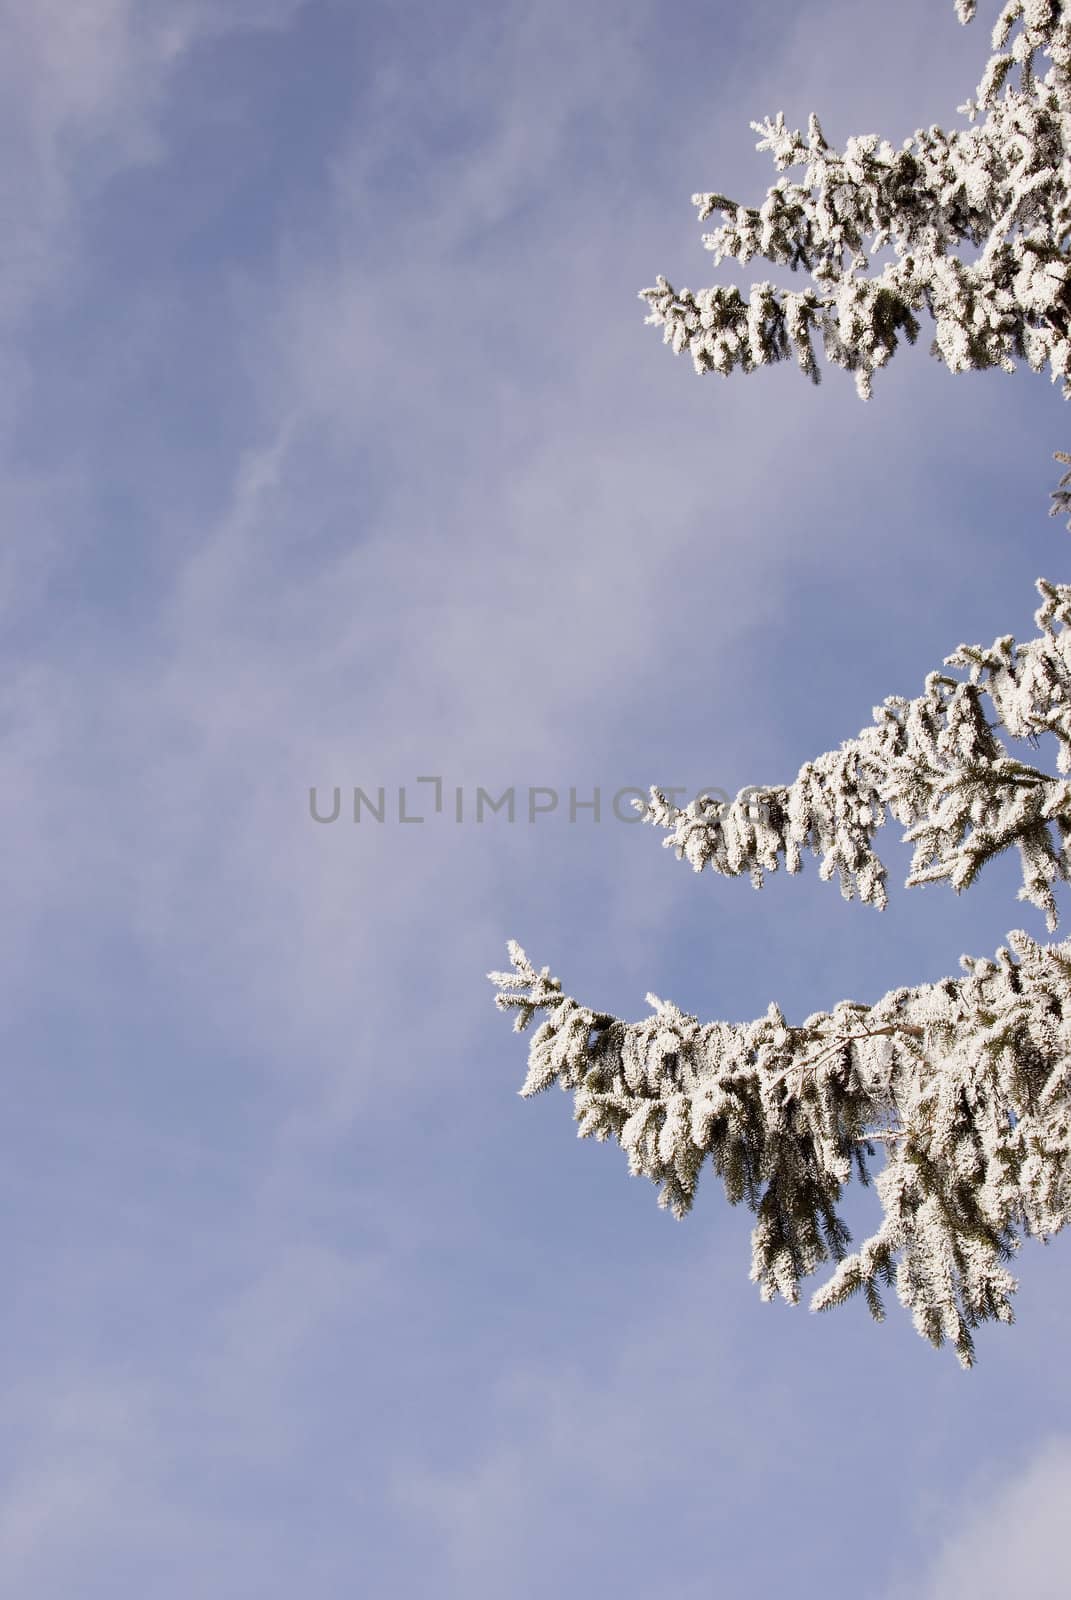 Winter fir branches with snow and hoar on sky background